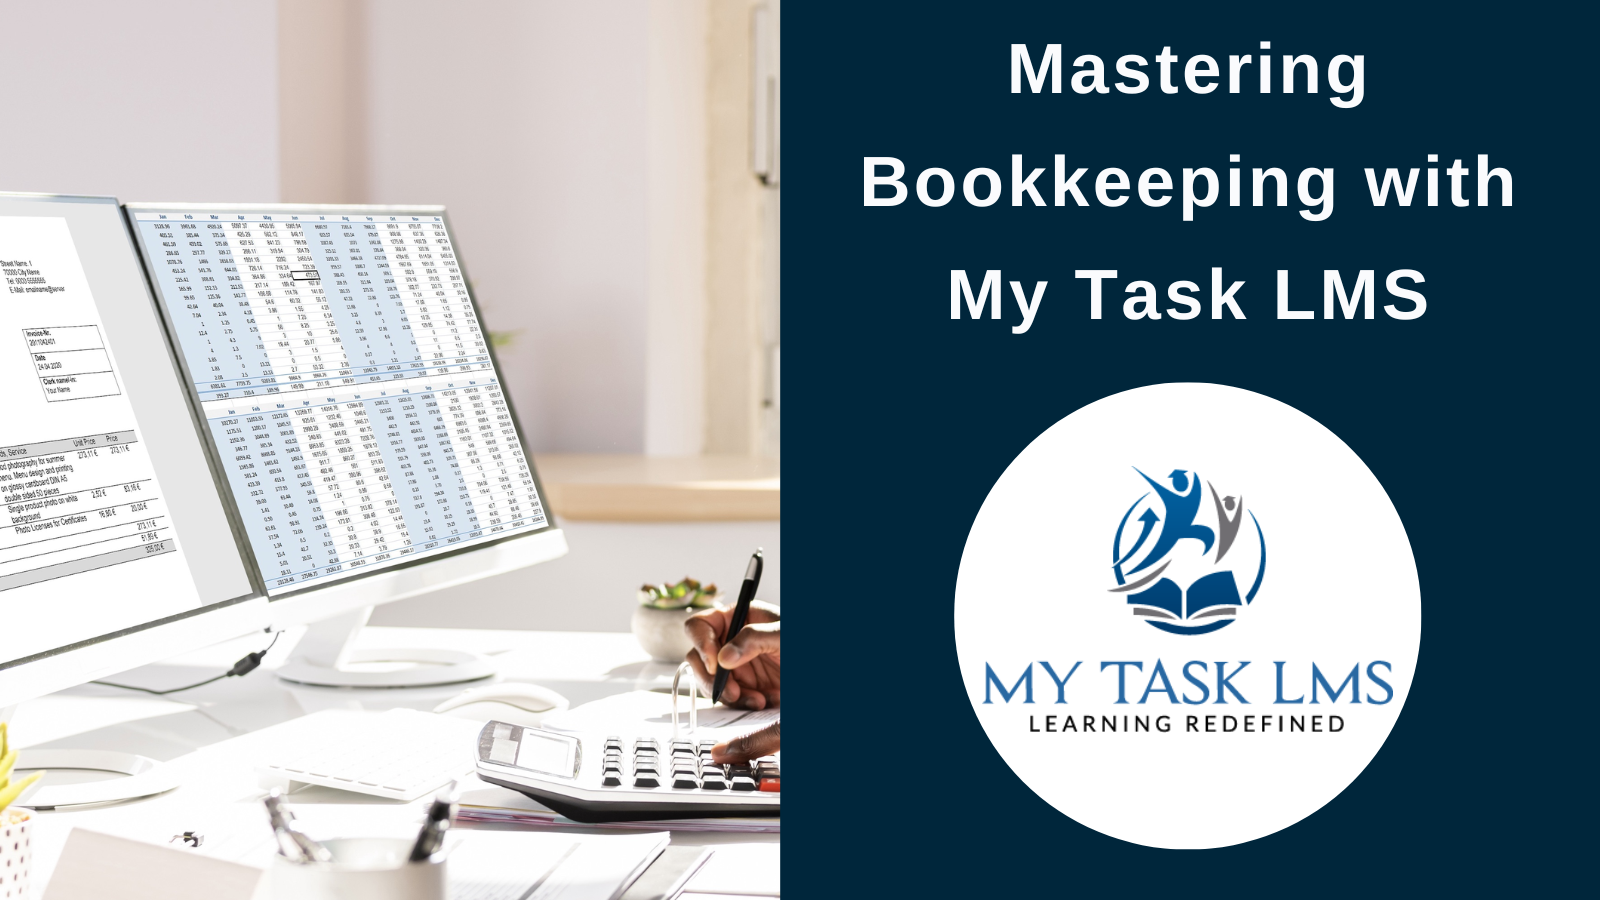 Master Bookkeeping with My Task LMS